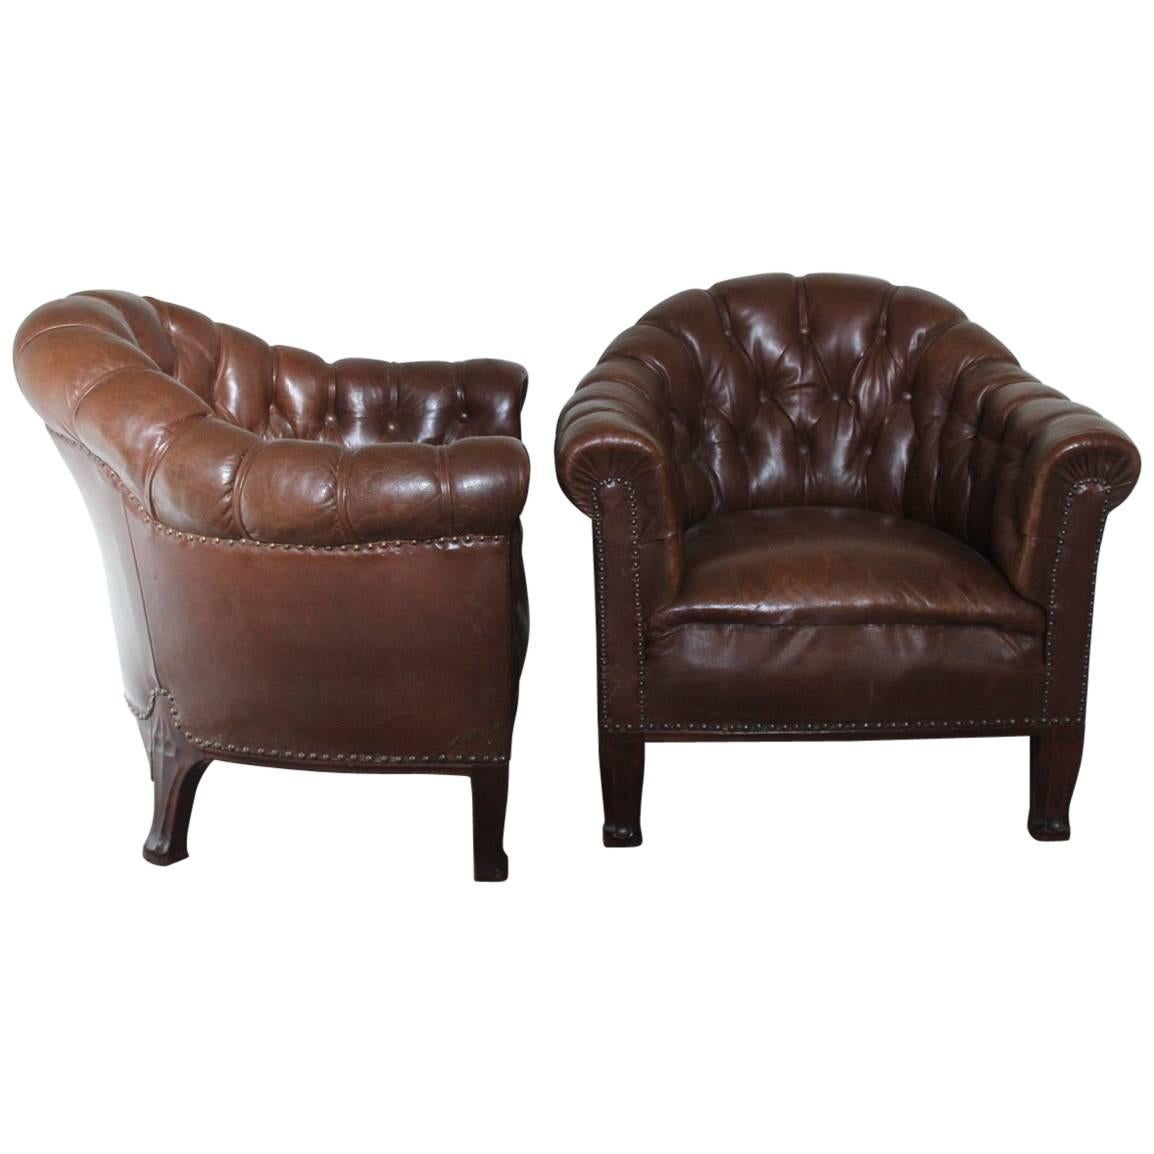 Unusual Pair of French Buttoned Leather Armchairs